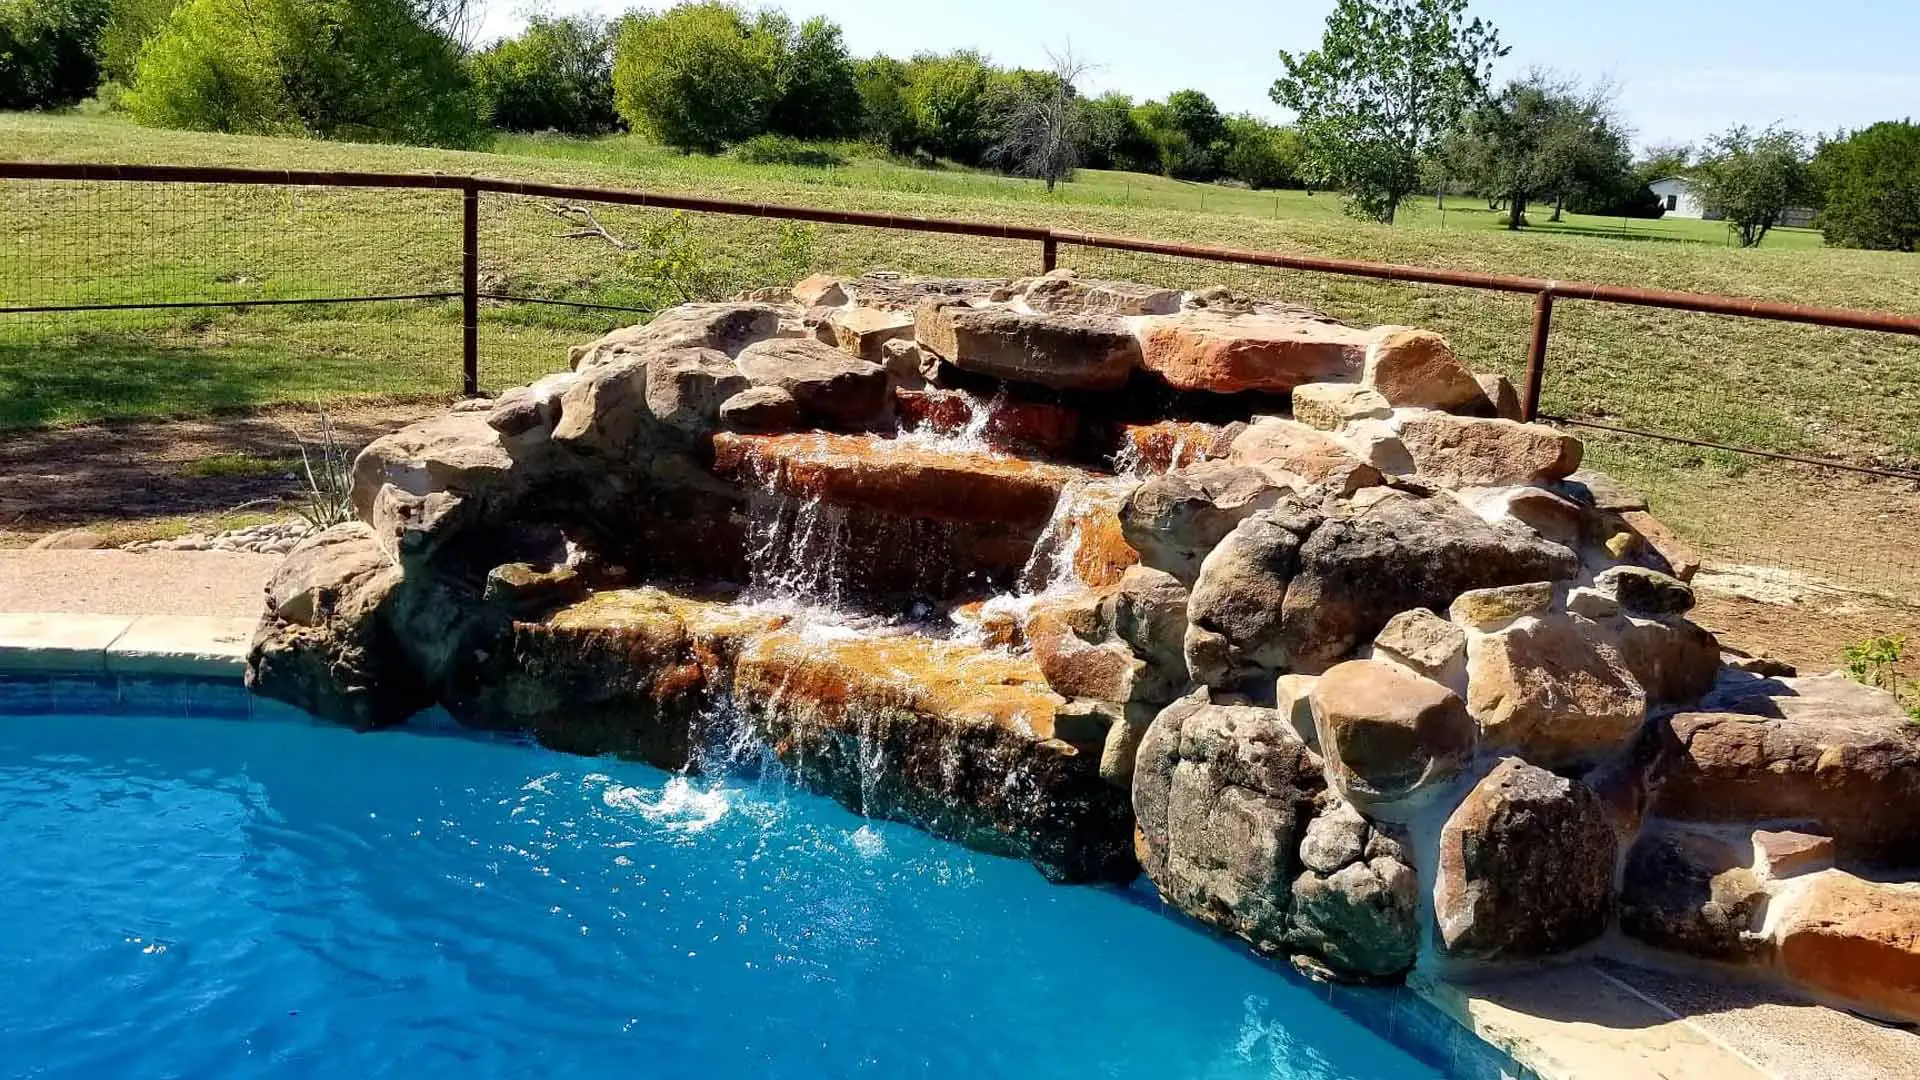 Waterfall water feature added to pool in landscape in China Spring, TX.